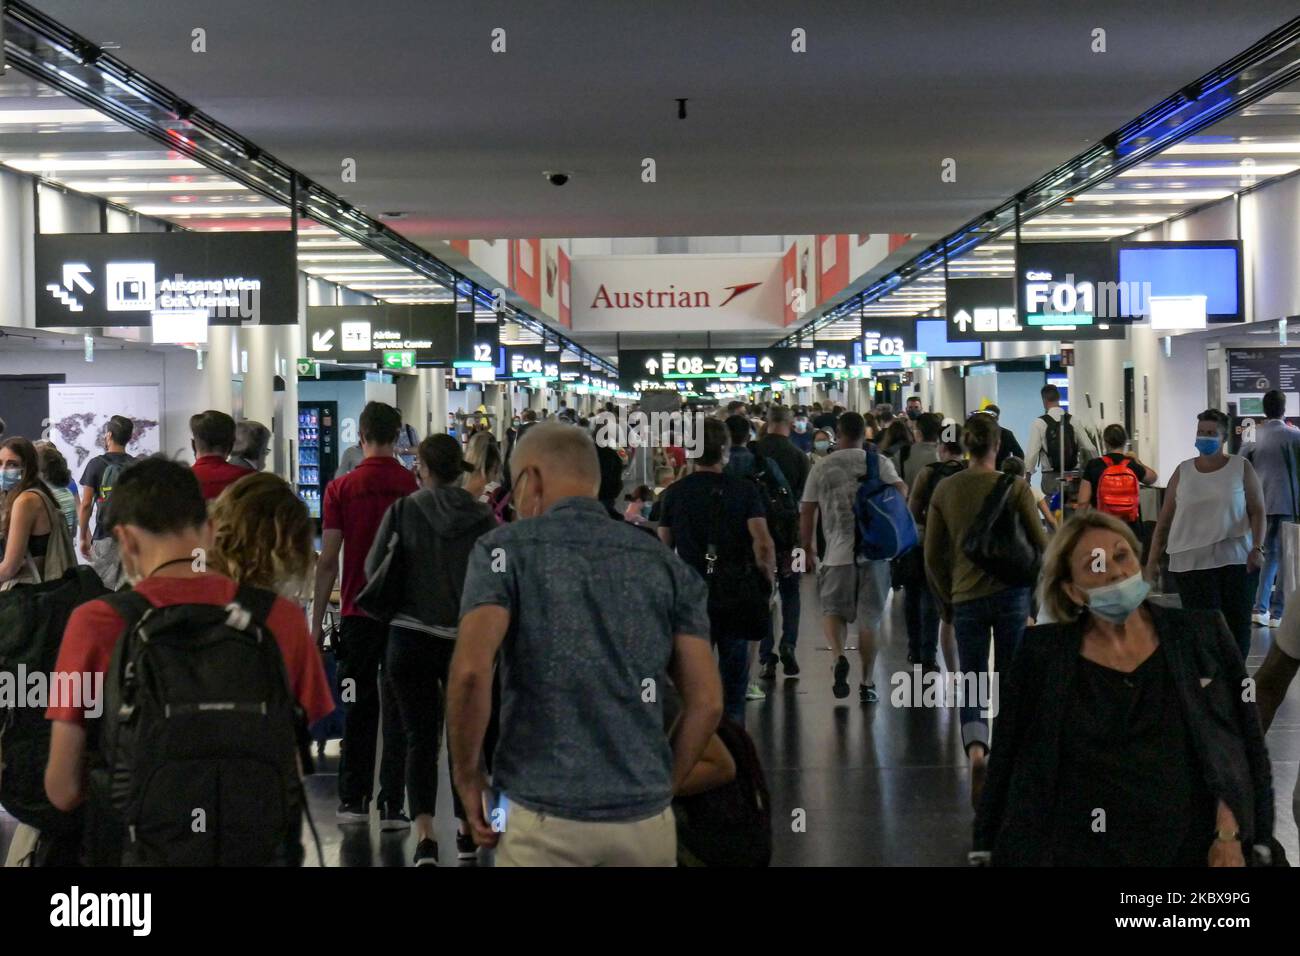 Passengers wearing facemasks, gloves and safety measures are seen at the terminal, F Gates area of Vienna International Airport VIE LOWW - Flughafen Wien-Schwechat, on July 15, 2020 serving the Austrian Capital but also Bratislava as it is 55km away from the Slovak city during the Covid-19 Coronavirus pandemic era with social distancing measures and disinfecting hand sanitizer everywhere afther the lockdown period. On July 1, Austria issues travel warning for six Balkan states countries, Serbia, Montenegro, Bosnia Herzegovina, North Macedonia, Albania and Kosovo. Passengers traveling from thos Stock Photo